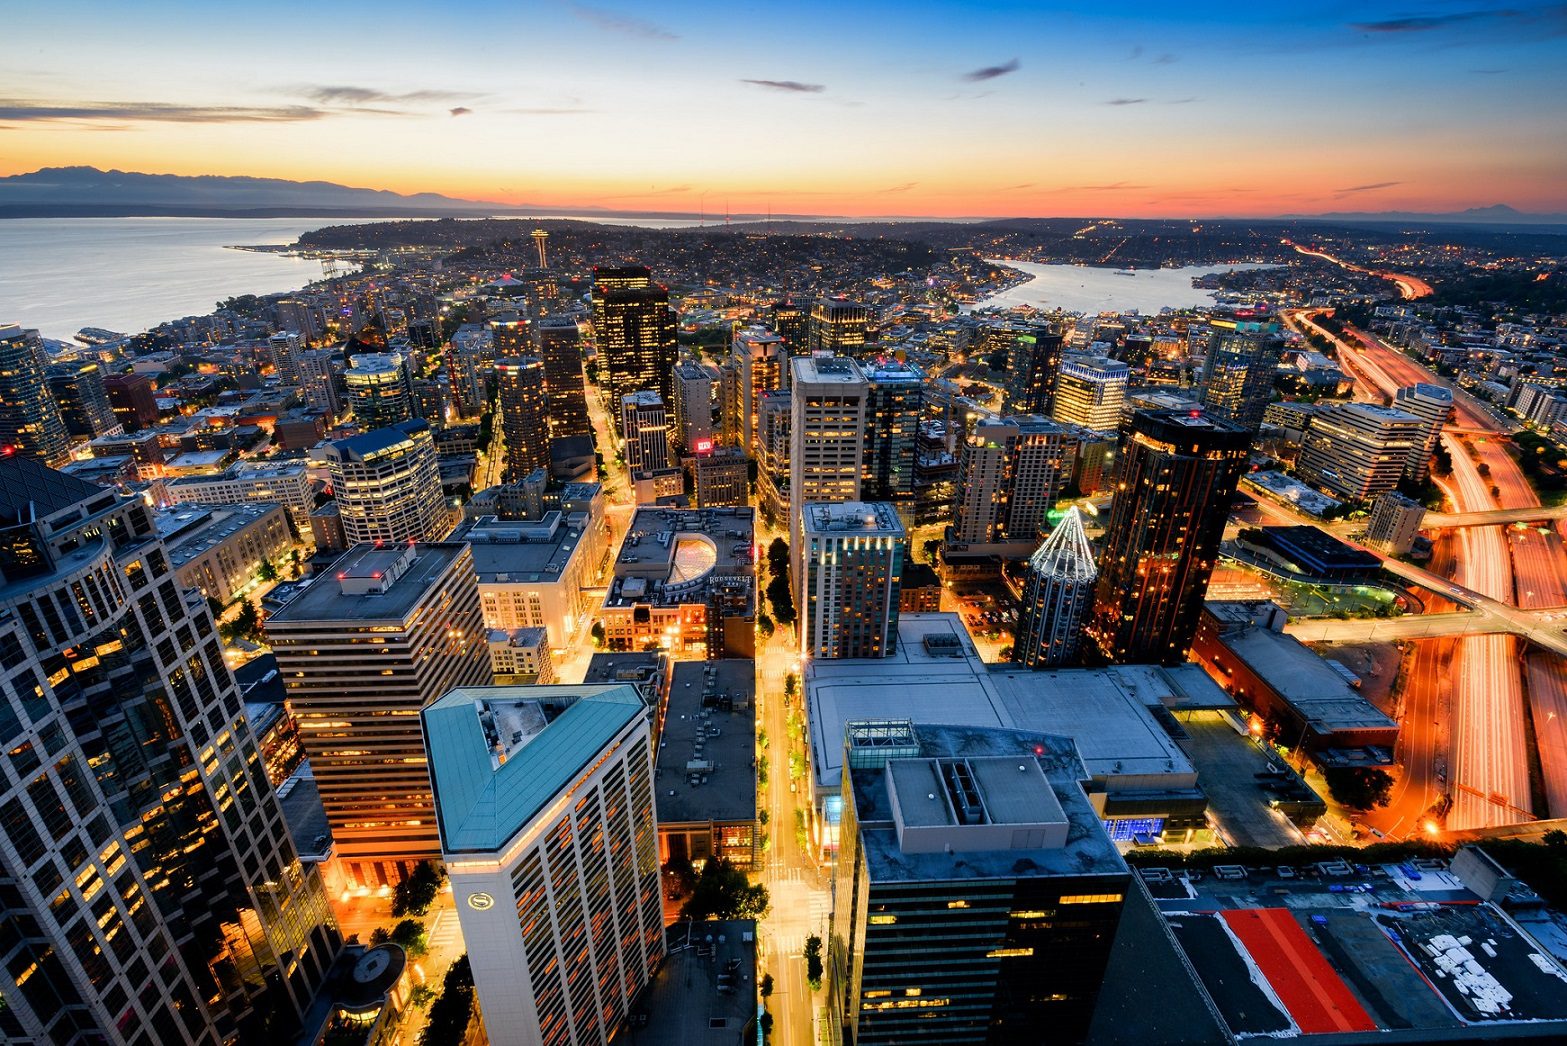 Photo of Seattle at sunset. Large buildings are shown throughout, with the dusk sky above, and bodies of water in the background.